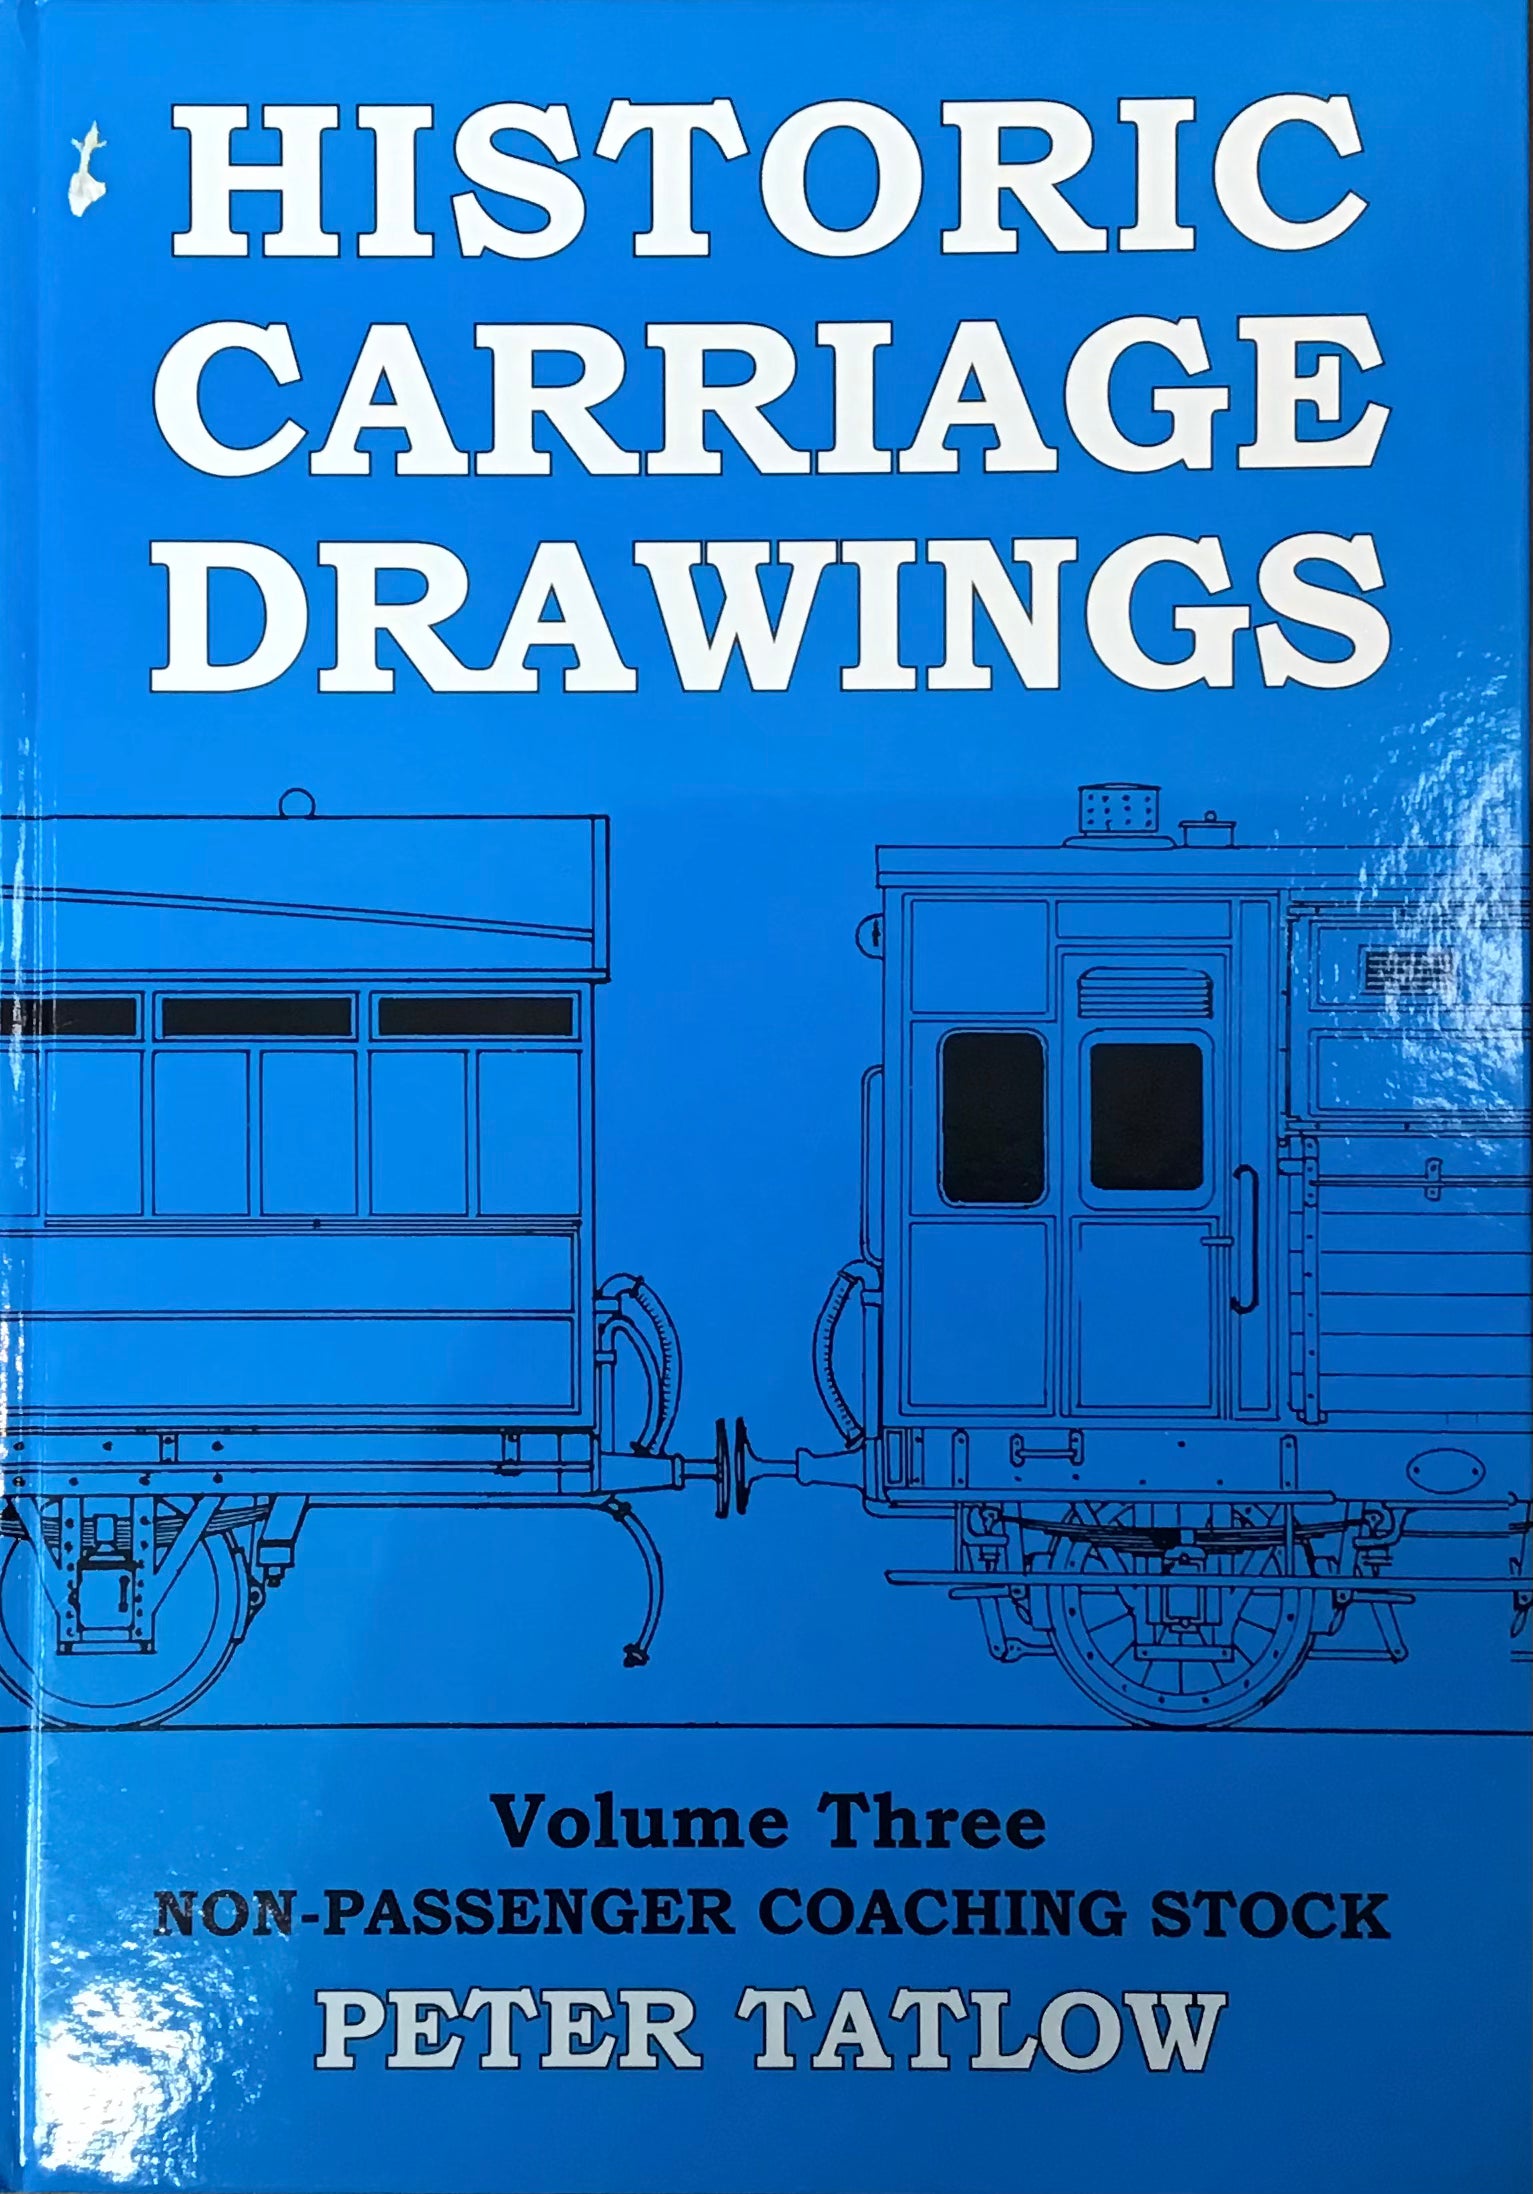 Historic Carriage Drawings Volume Three Non-Passenger Coaching Stock by Peter Tatlow - Chester Model Centre